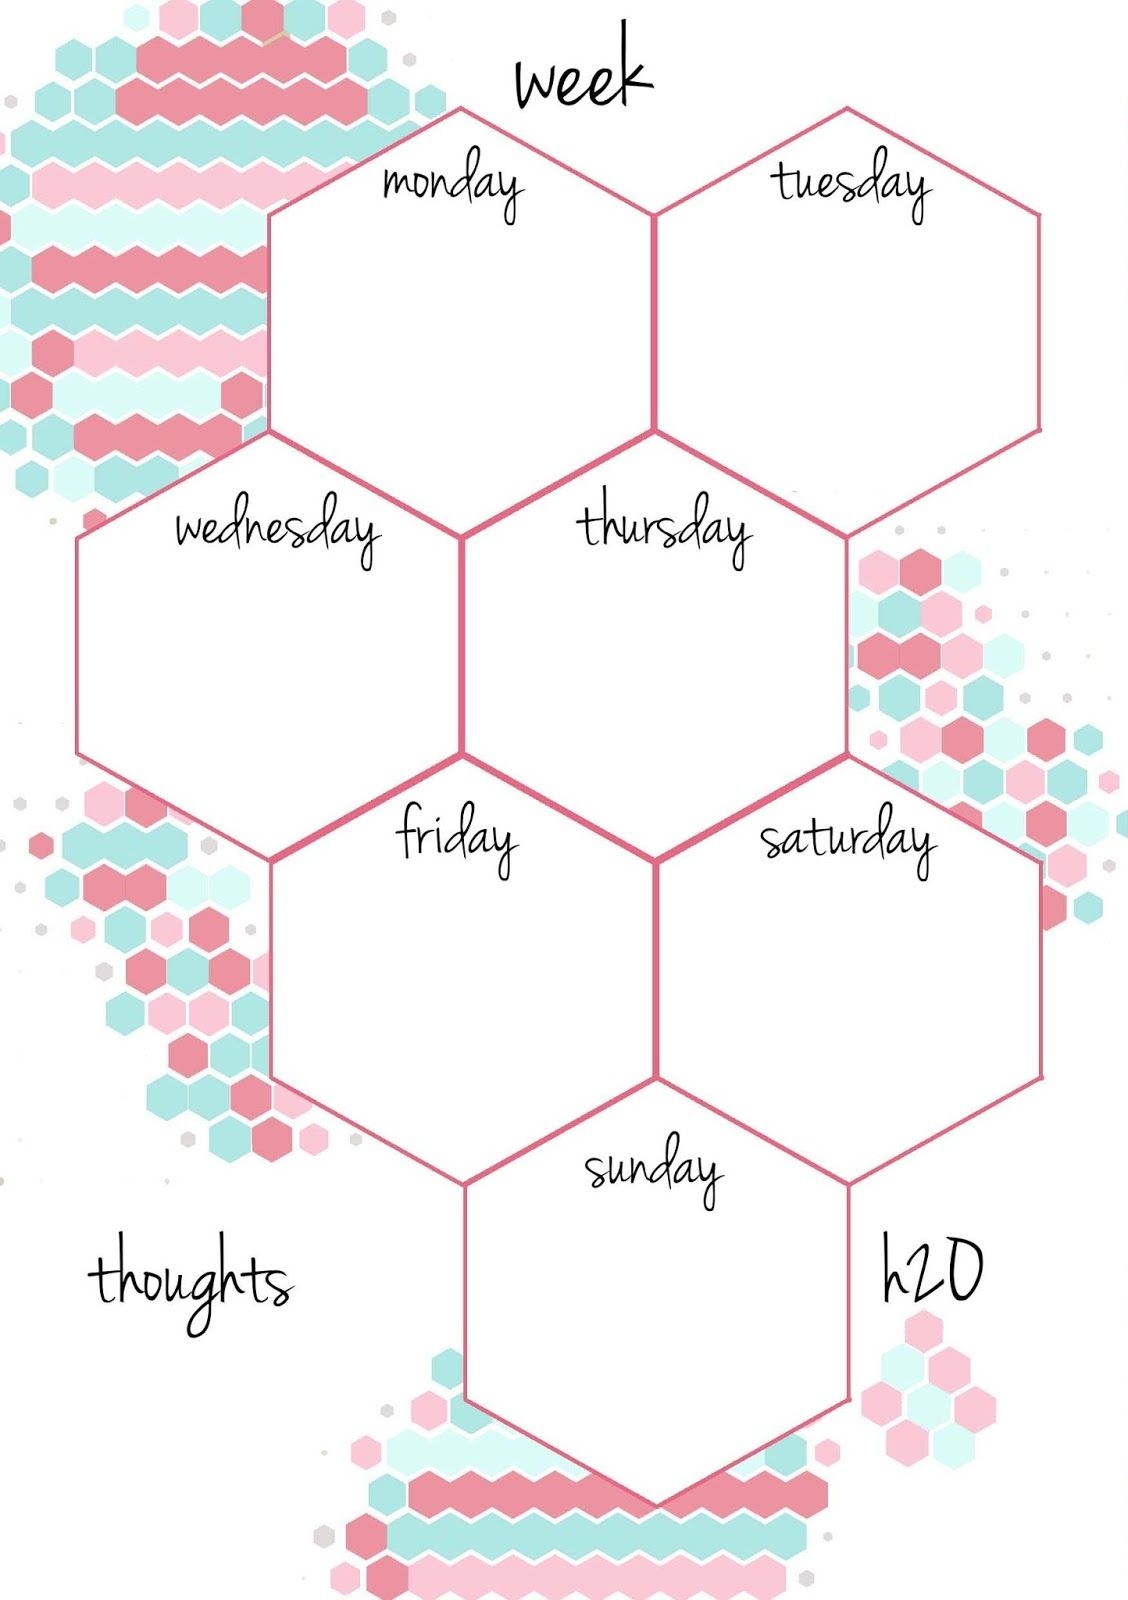 Pb And J Studio: Free Printable Planner Inserts Candy Hexagon In A5 - Free Printable Organizer 2017